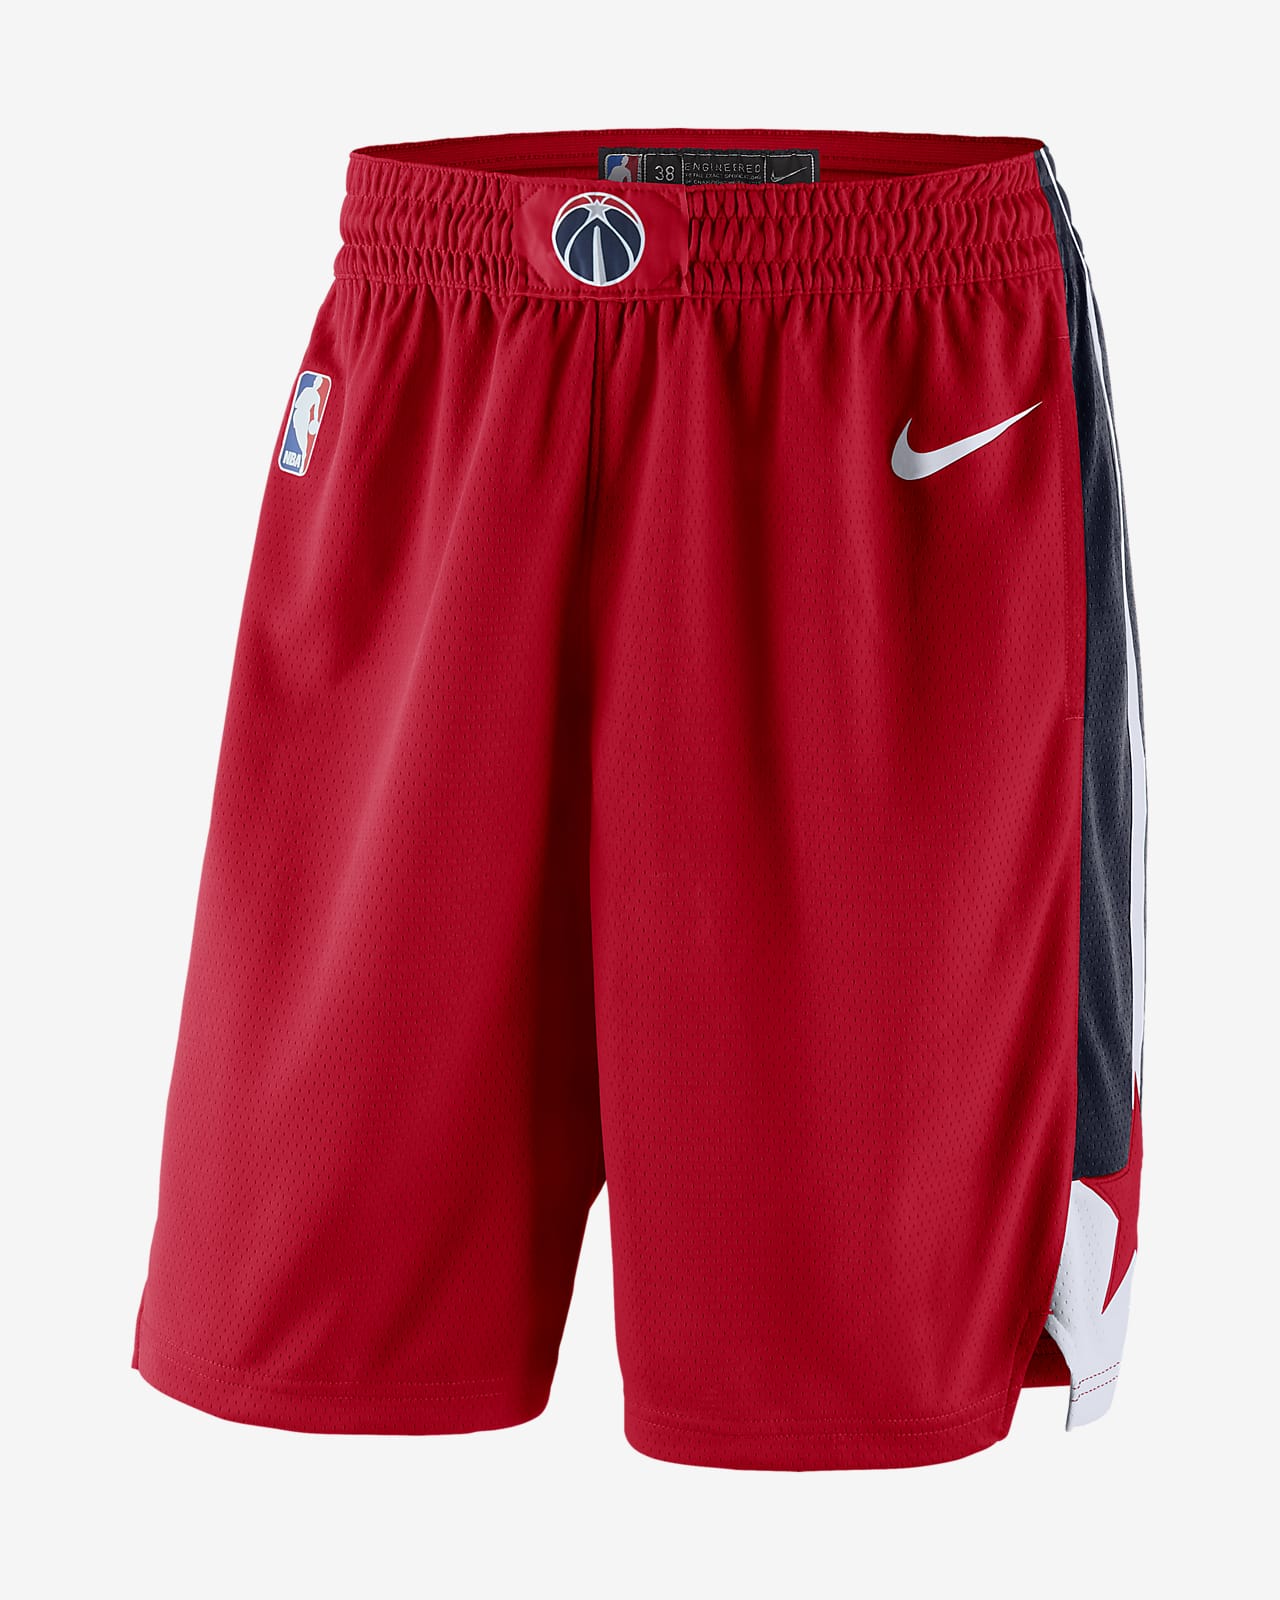 Post Game Basketball Shorts Stone Vale Co